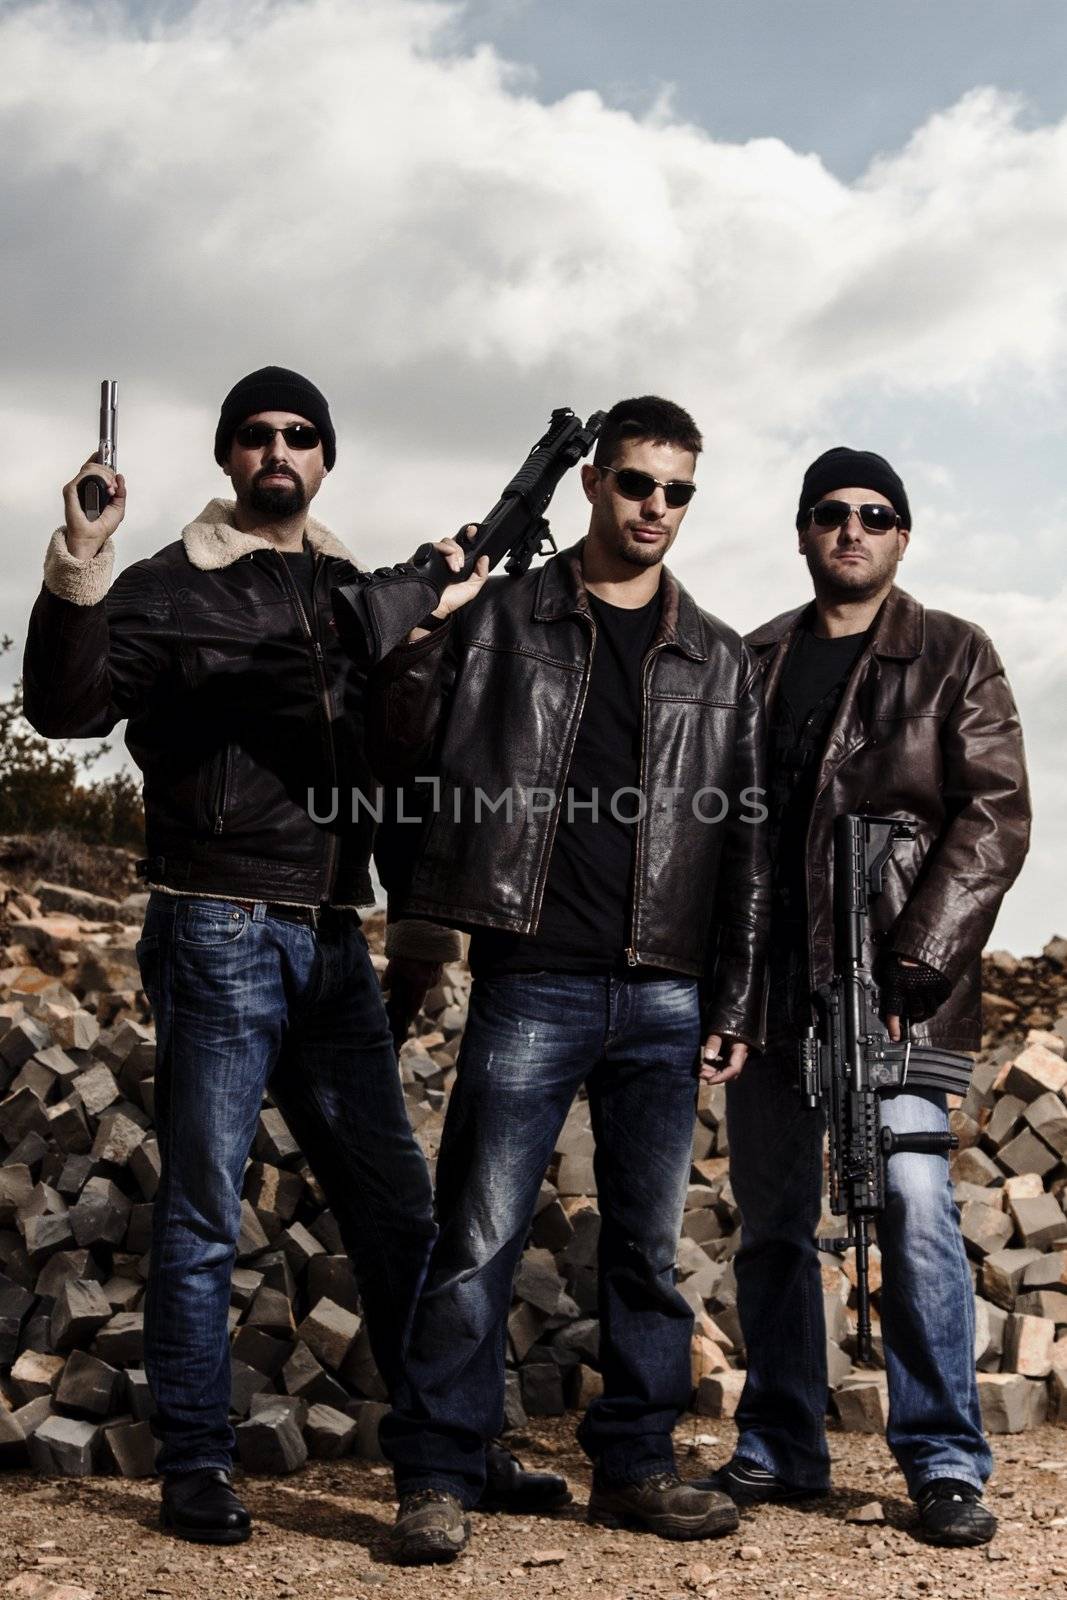 View of a group of gang members with guns.